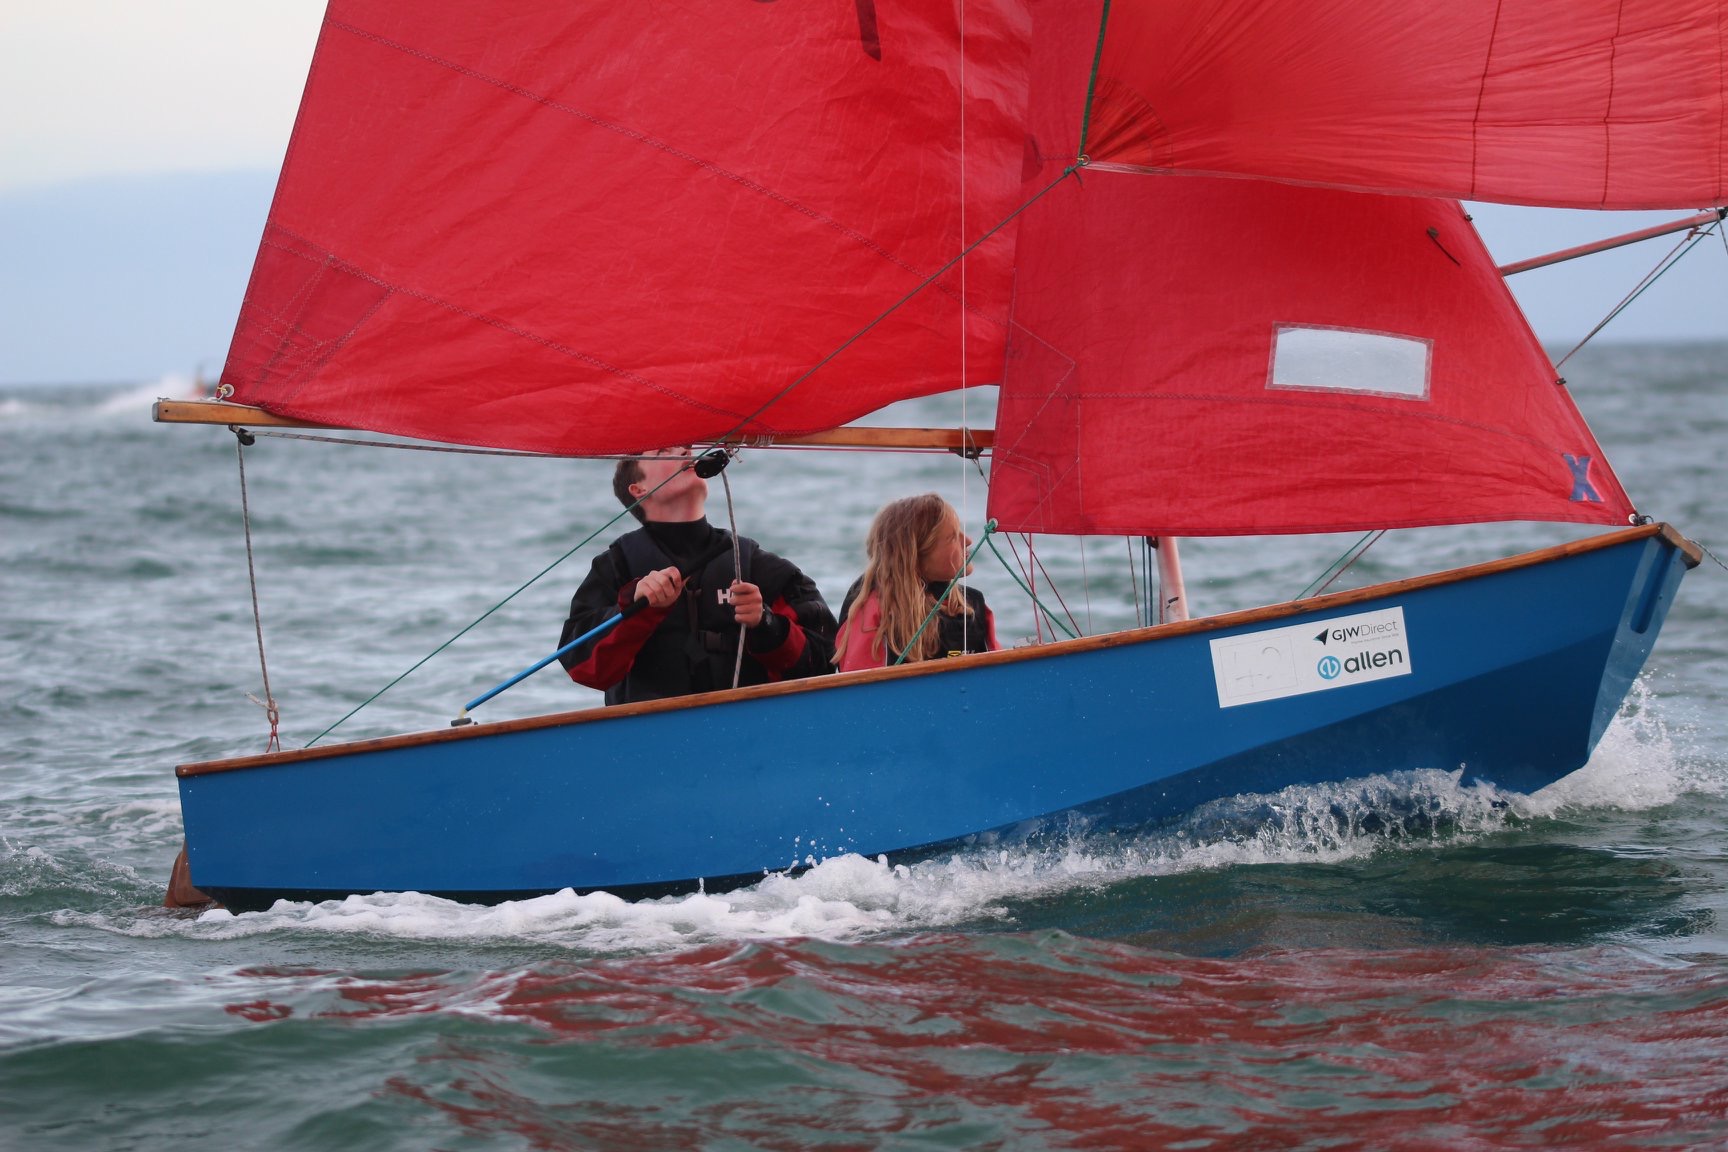 A blue wooden Mirror dinghy racing with spinnaker set with camera to leeward